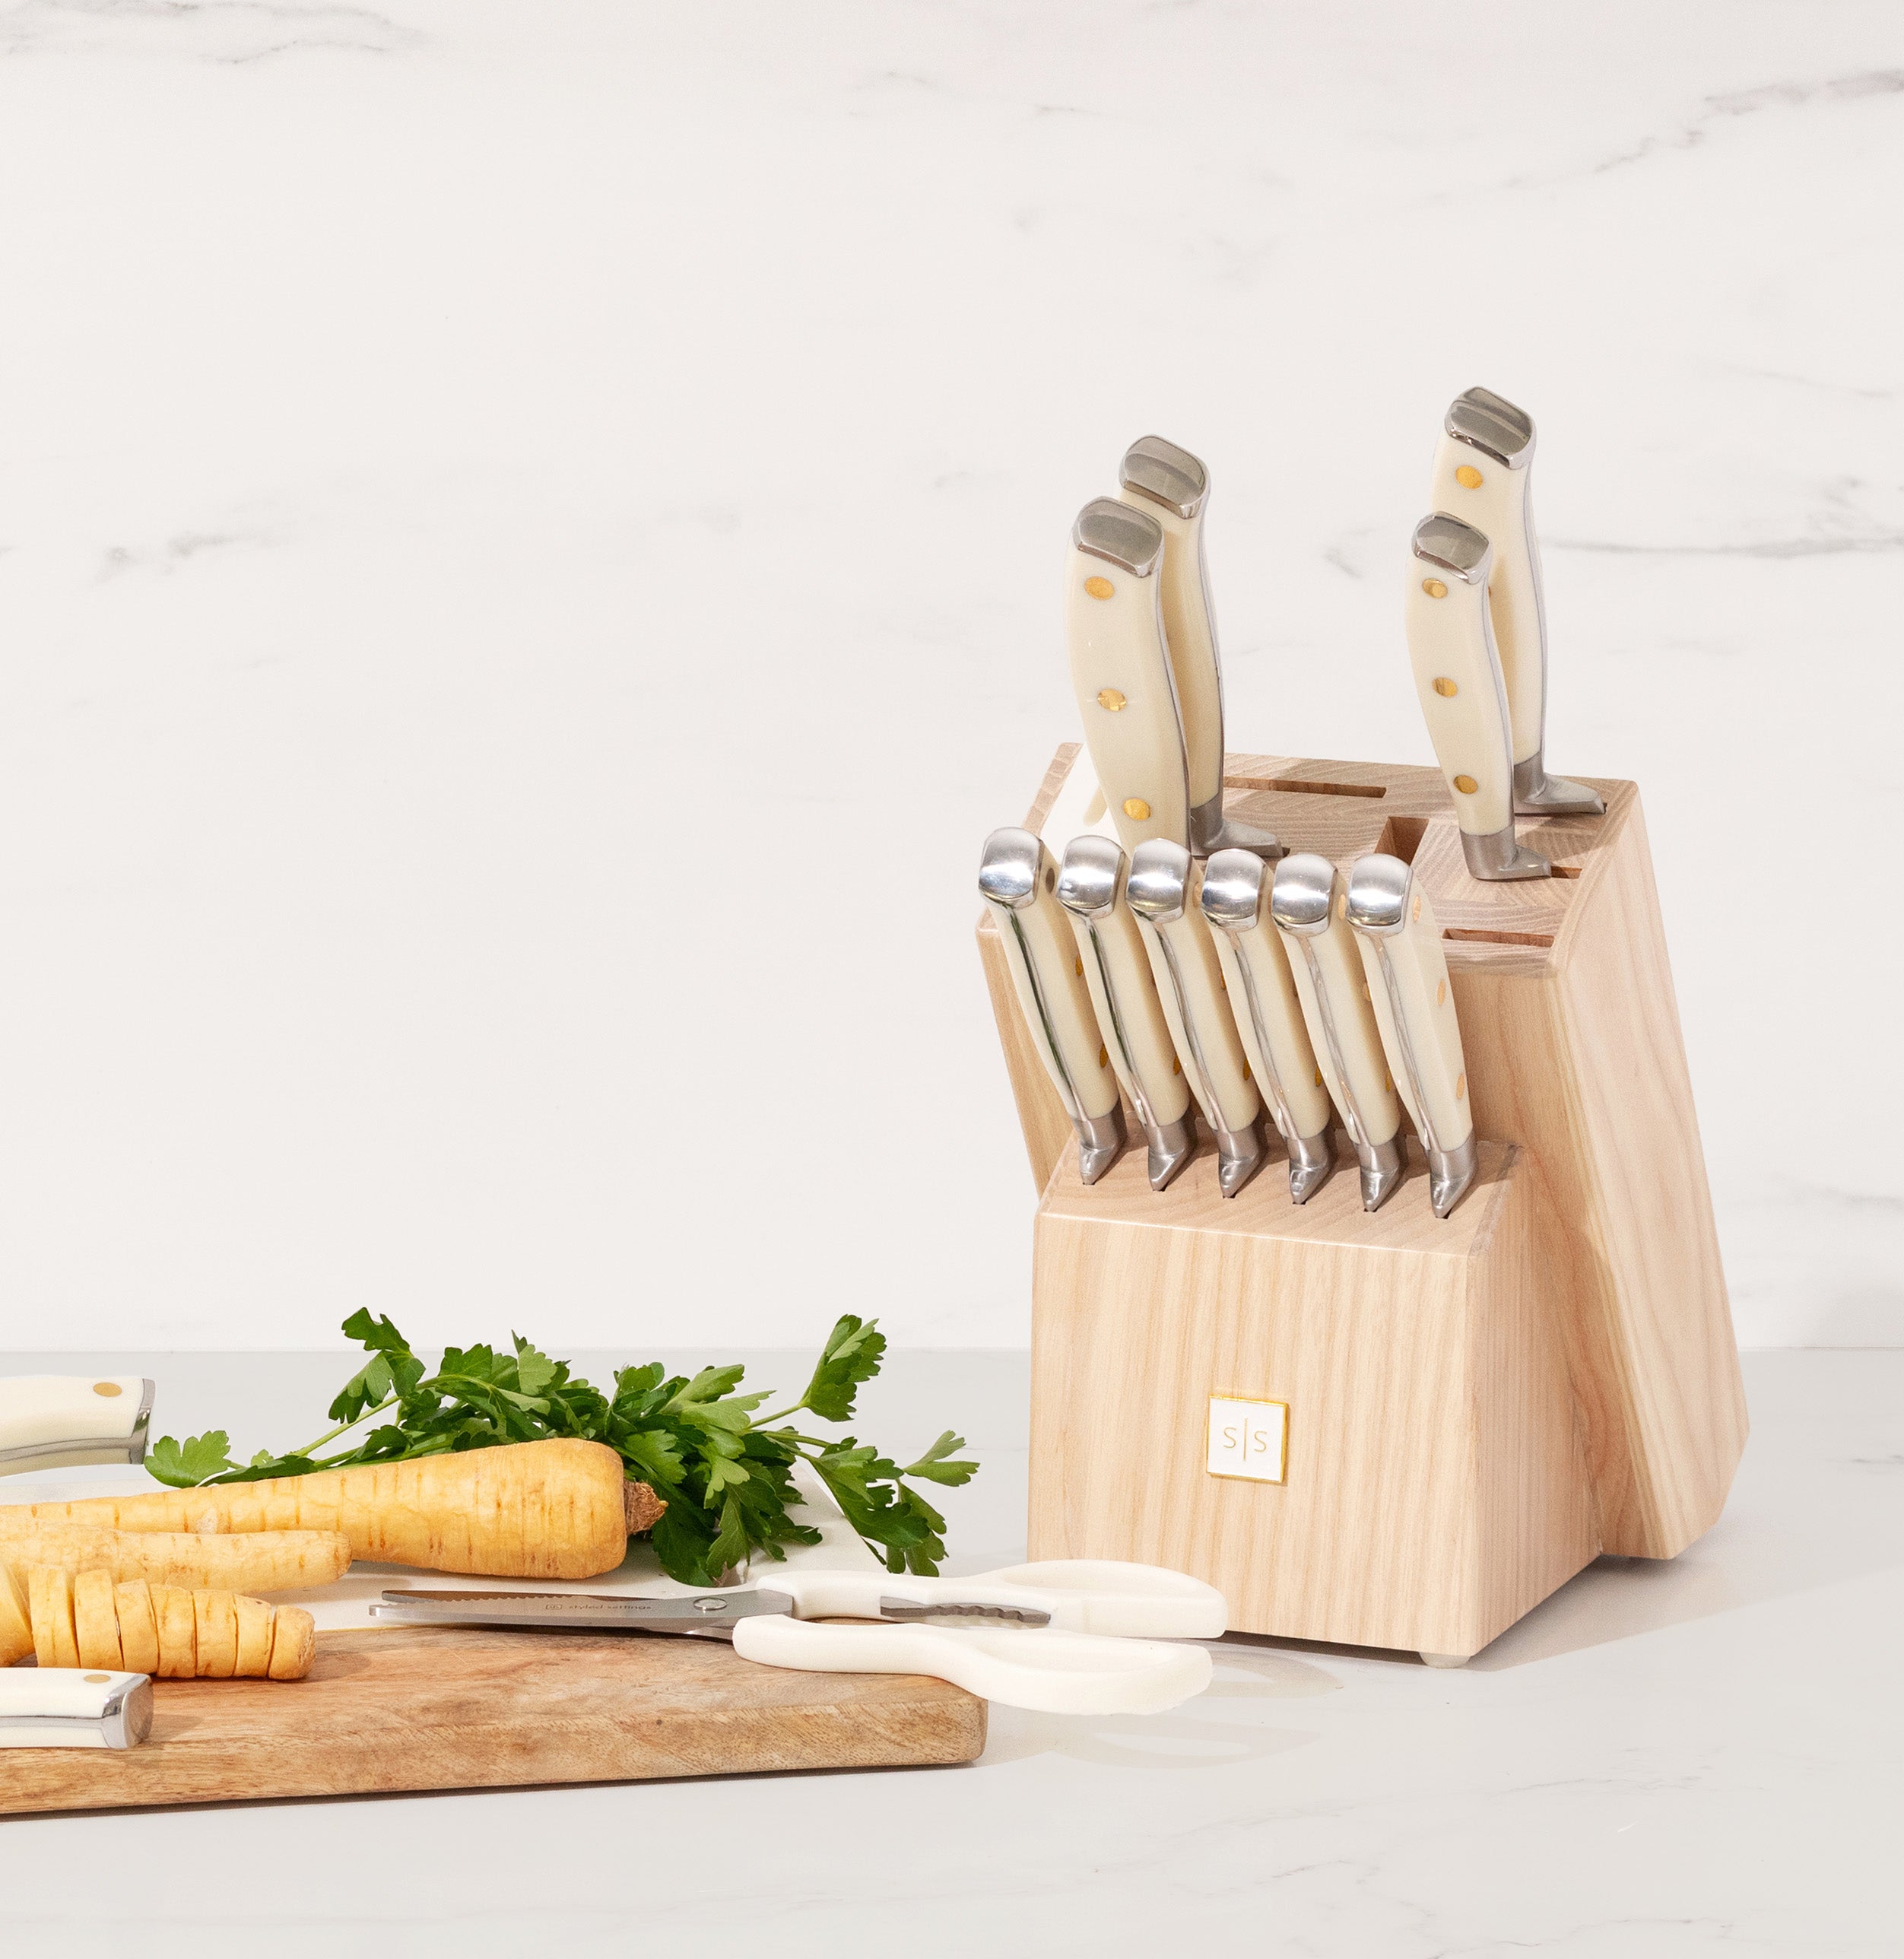 White and Silver Riveted Knife Set with Ashwood Self-Sharpening Block